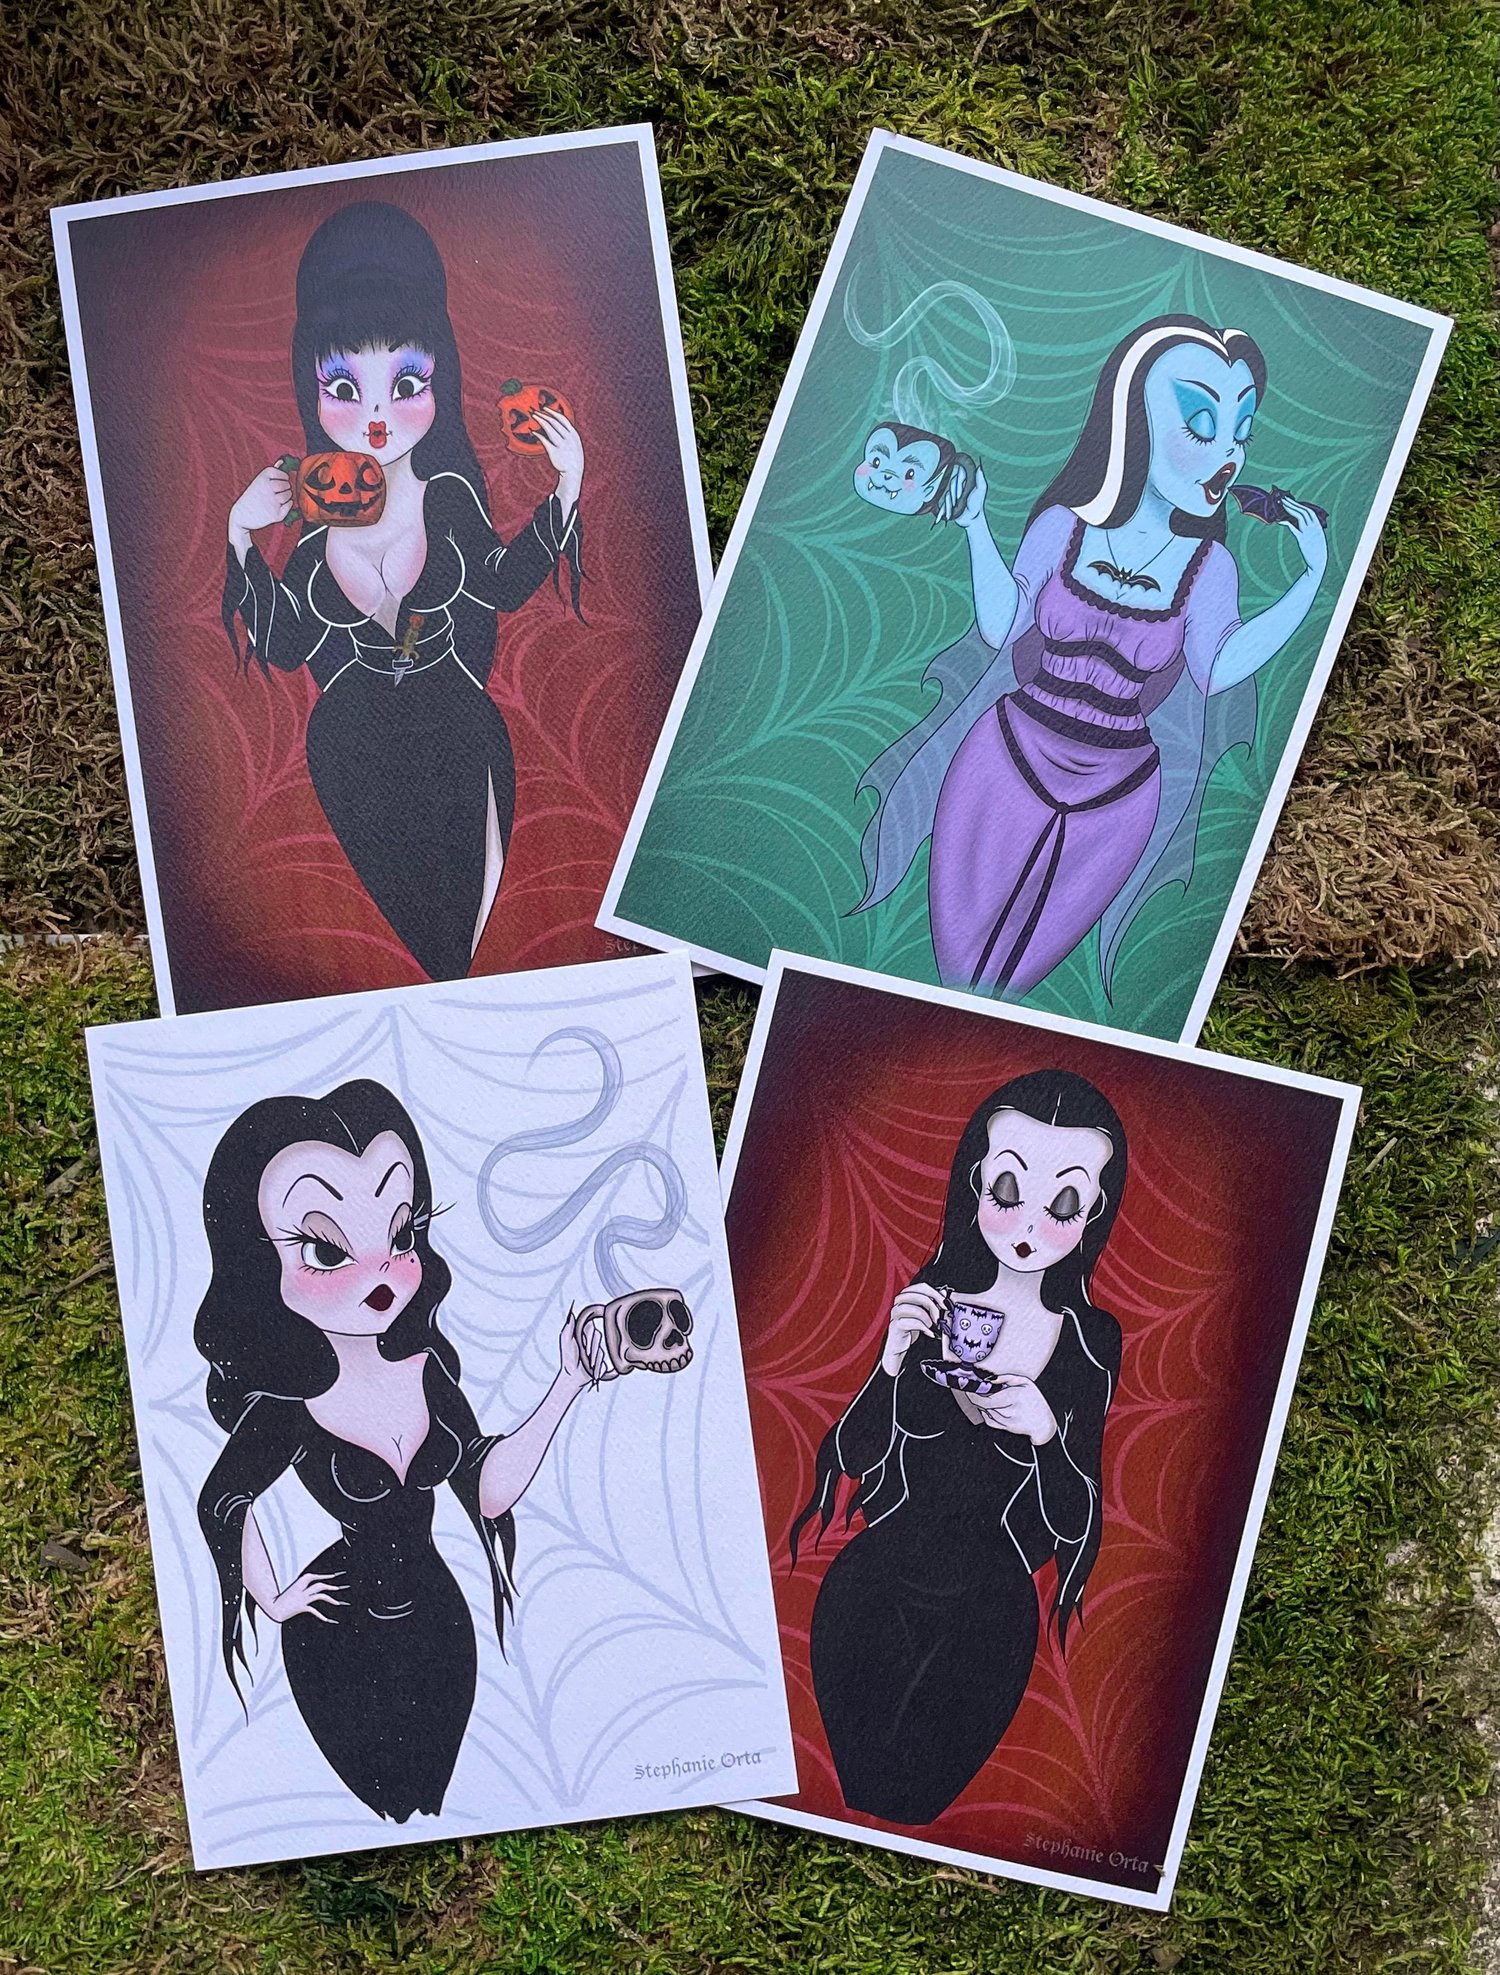  Morning Ghouls Prints - 5x7 inch